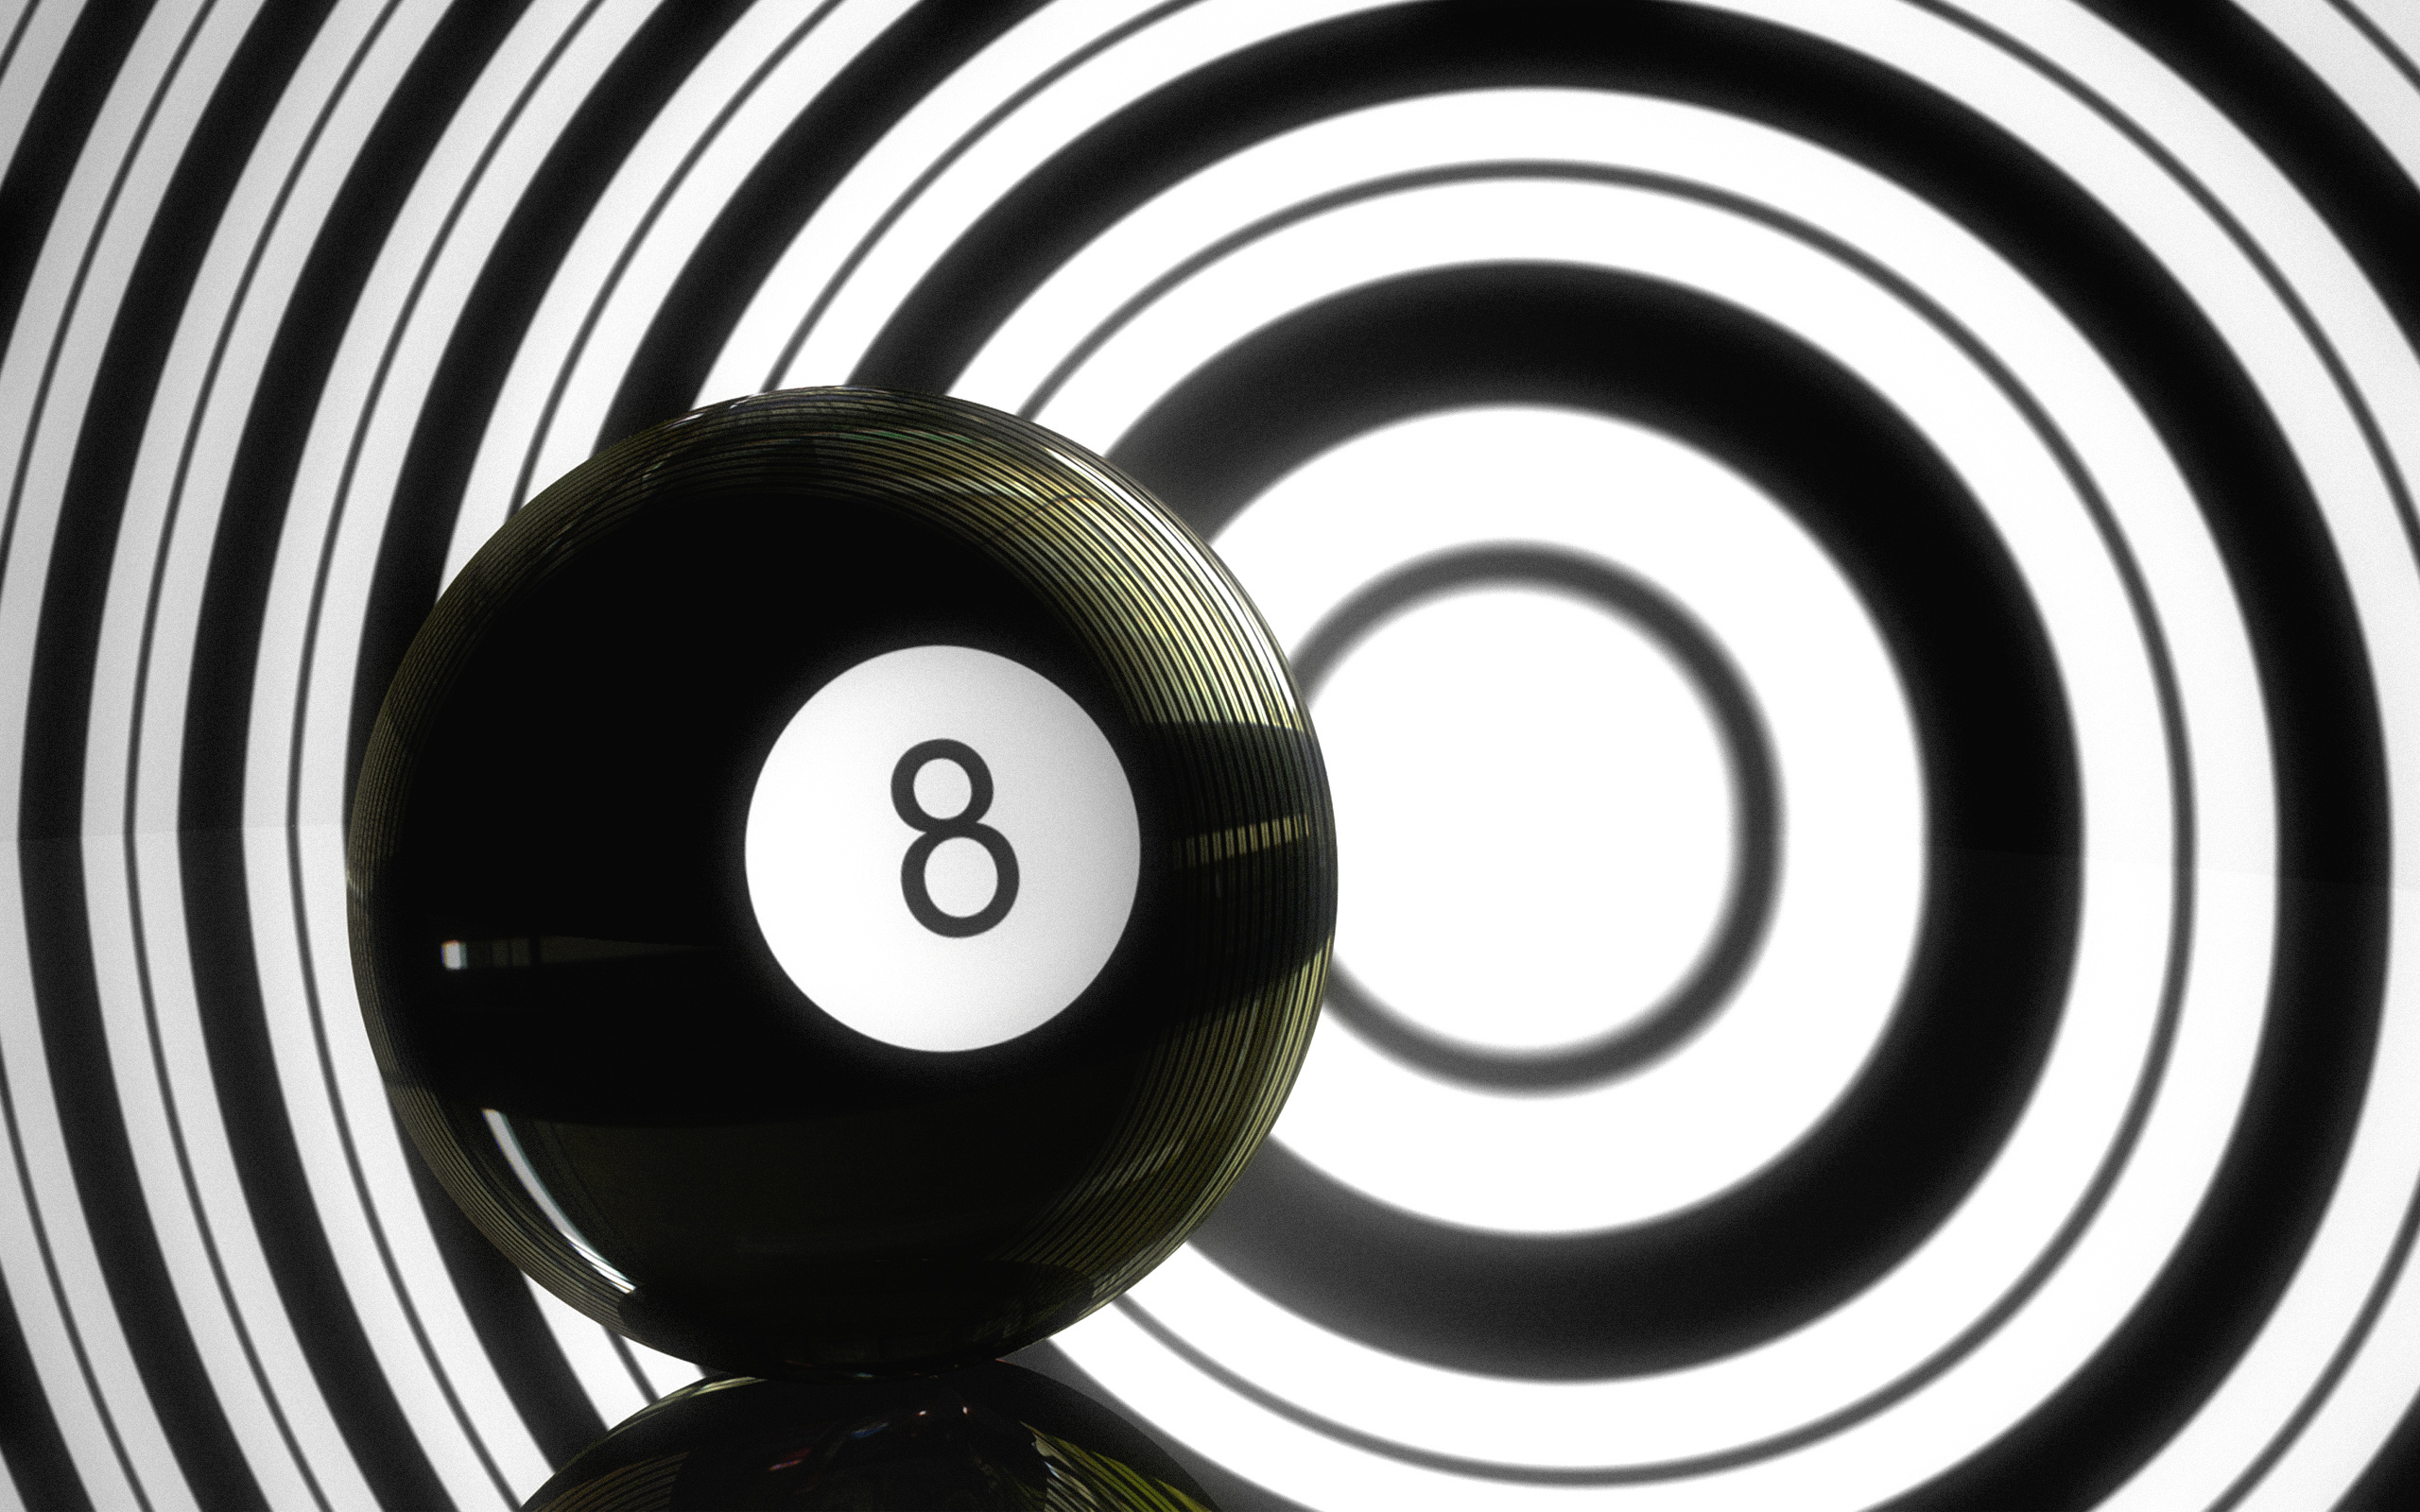 Billiards: The solid black object ball, The symbol of the eight-ball pool game, Cue sports. 2560x1600 HD Wallpaper.